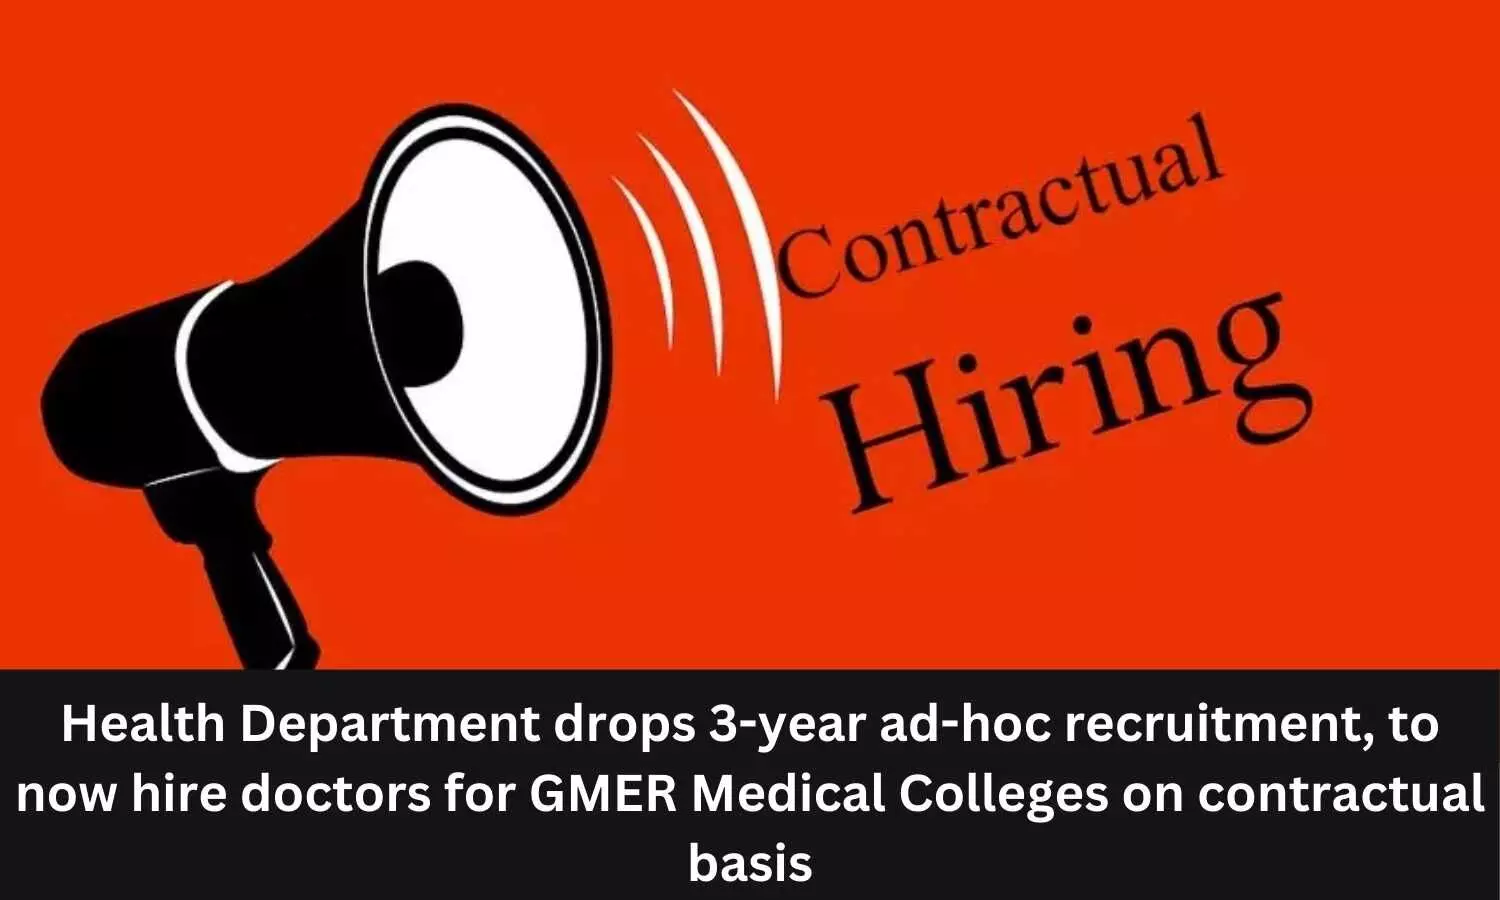 Health Dept to now hire doctors for GMER medical colleges on contractual basis